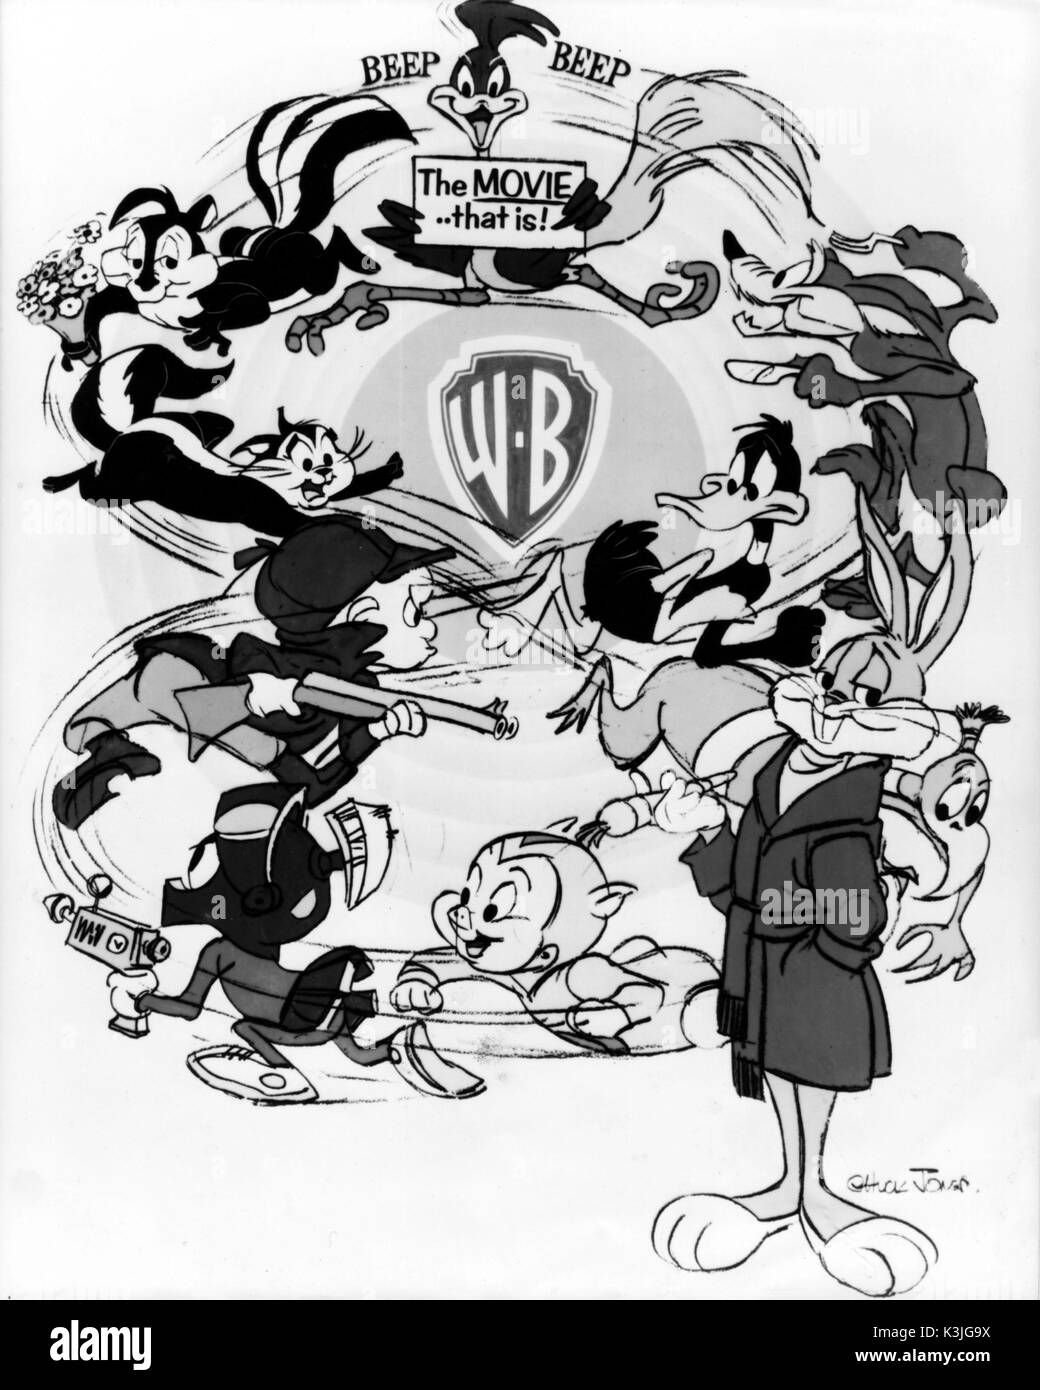 WARNER BROTHERS ANIMATED BLACK CAT, PEPE LE PEW, ROAD RUNNER, WYLE E.  COYOTE, DAFFY DUCK, DO-DO BIRD, BUGS BUNNY, PORKY PIG, ELMER FUDD,  MARIN-THE-MARTIAN The Looney Tunes cartoon characters. WARNER BROTHERS  ANIMATED